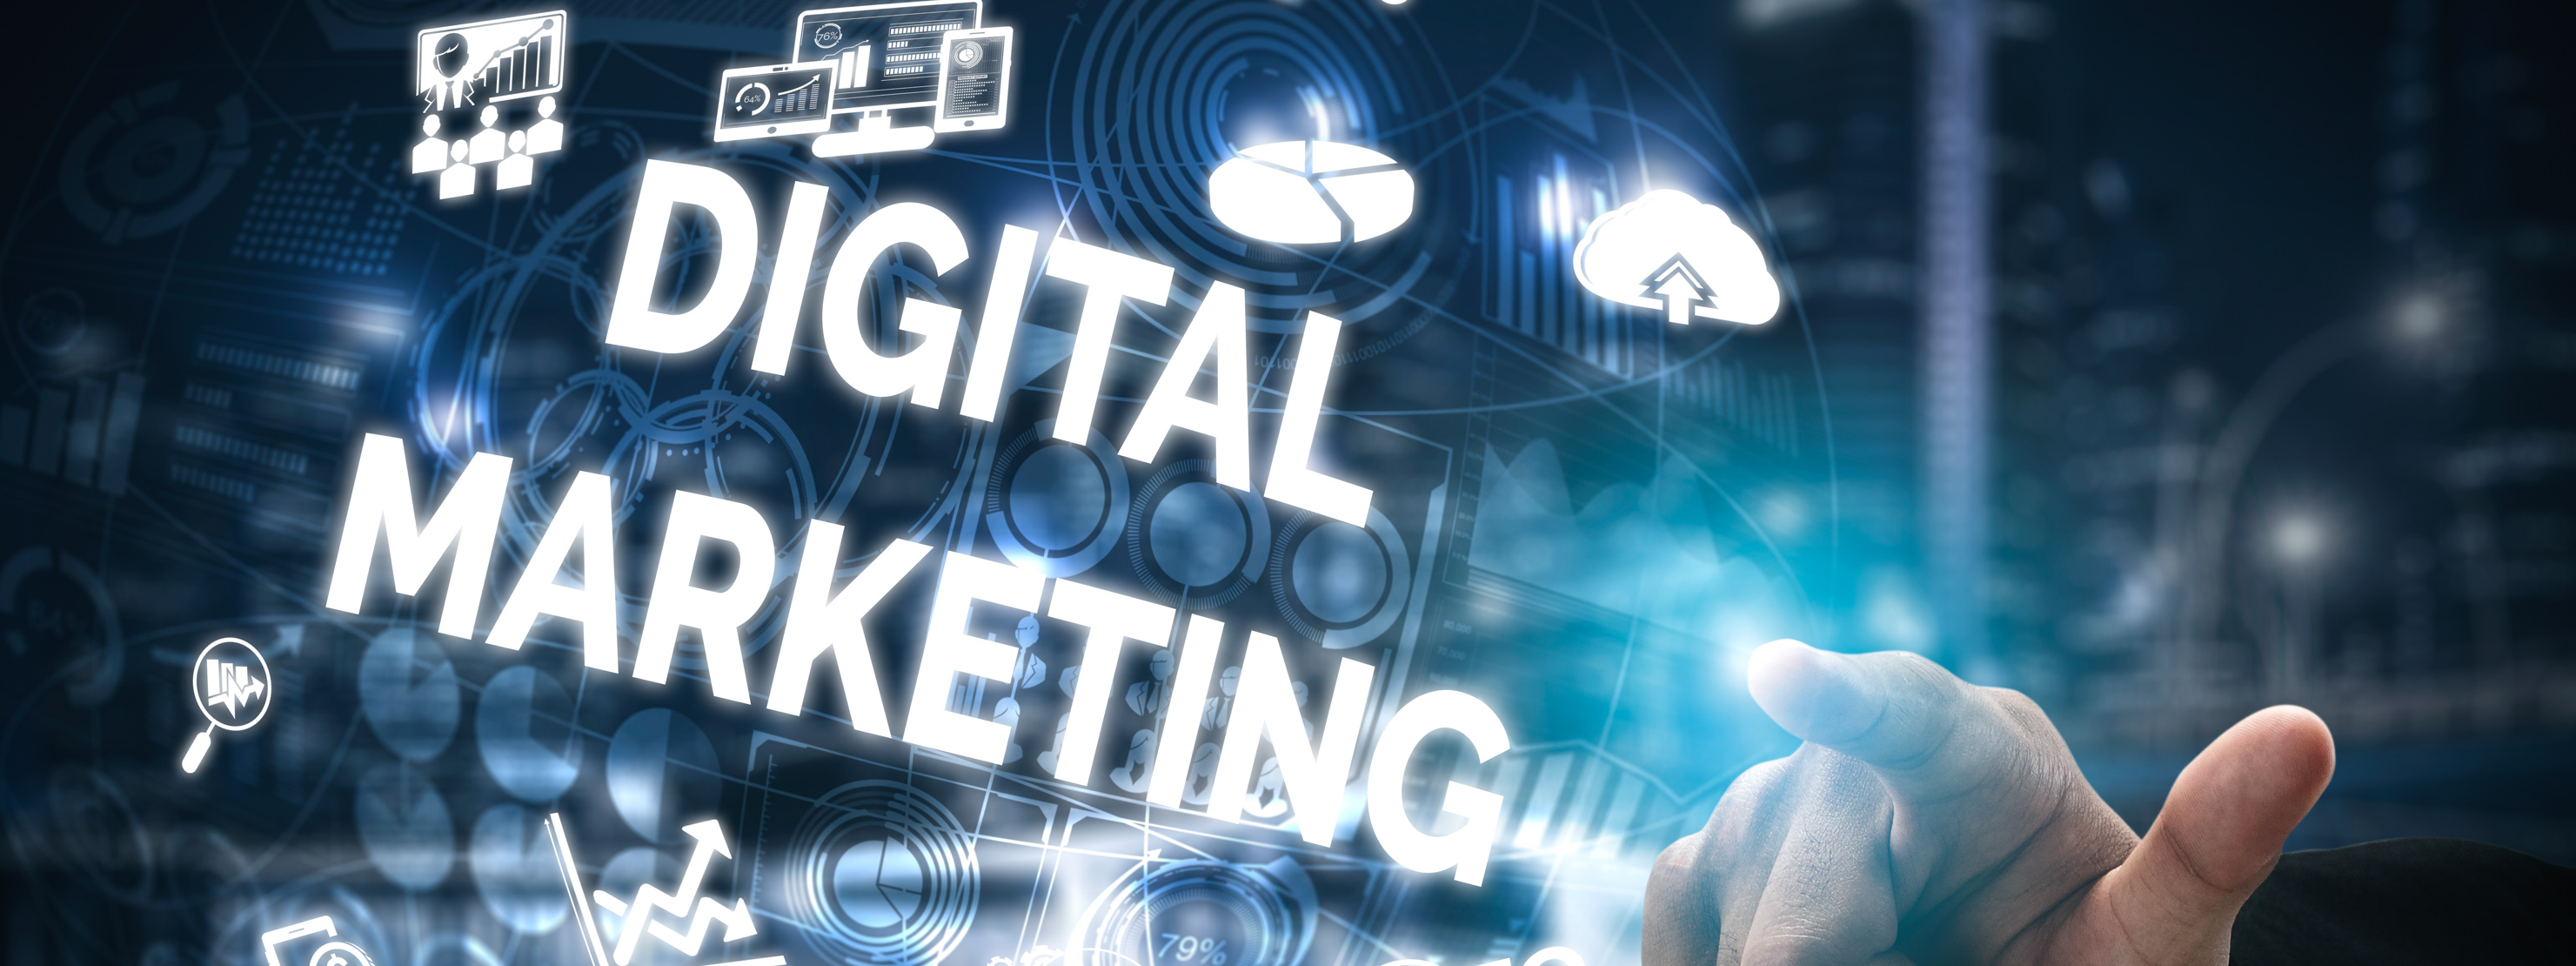 7 Quick Hacks That Digital Marketing Beginners Can Use to Grow Their Business FAST